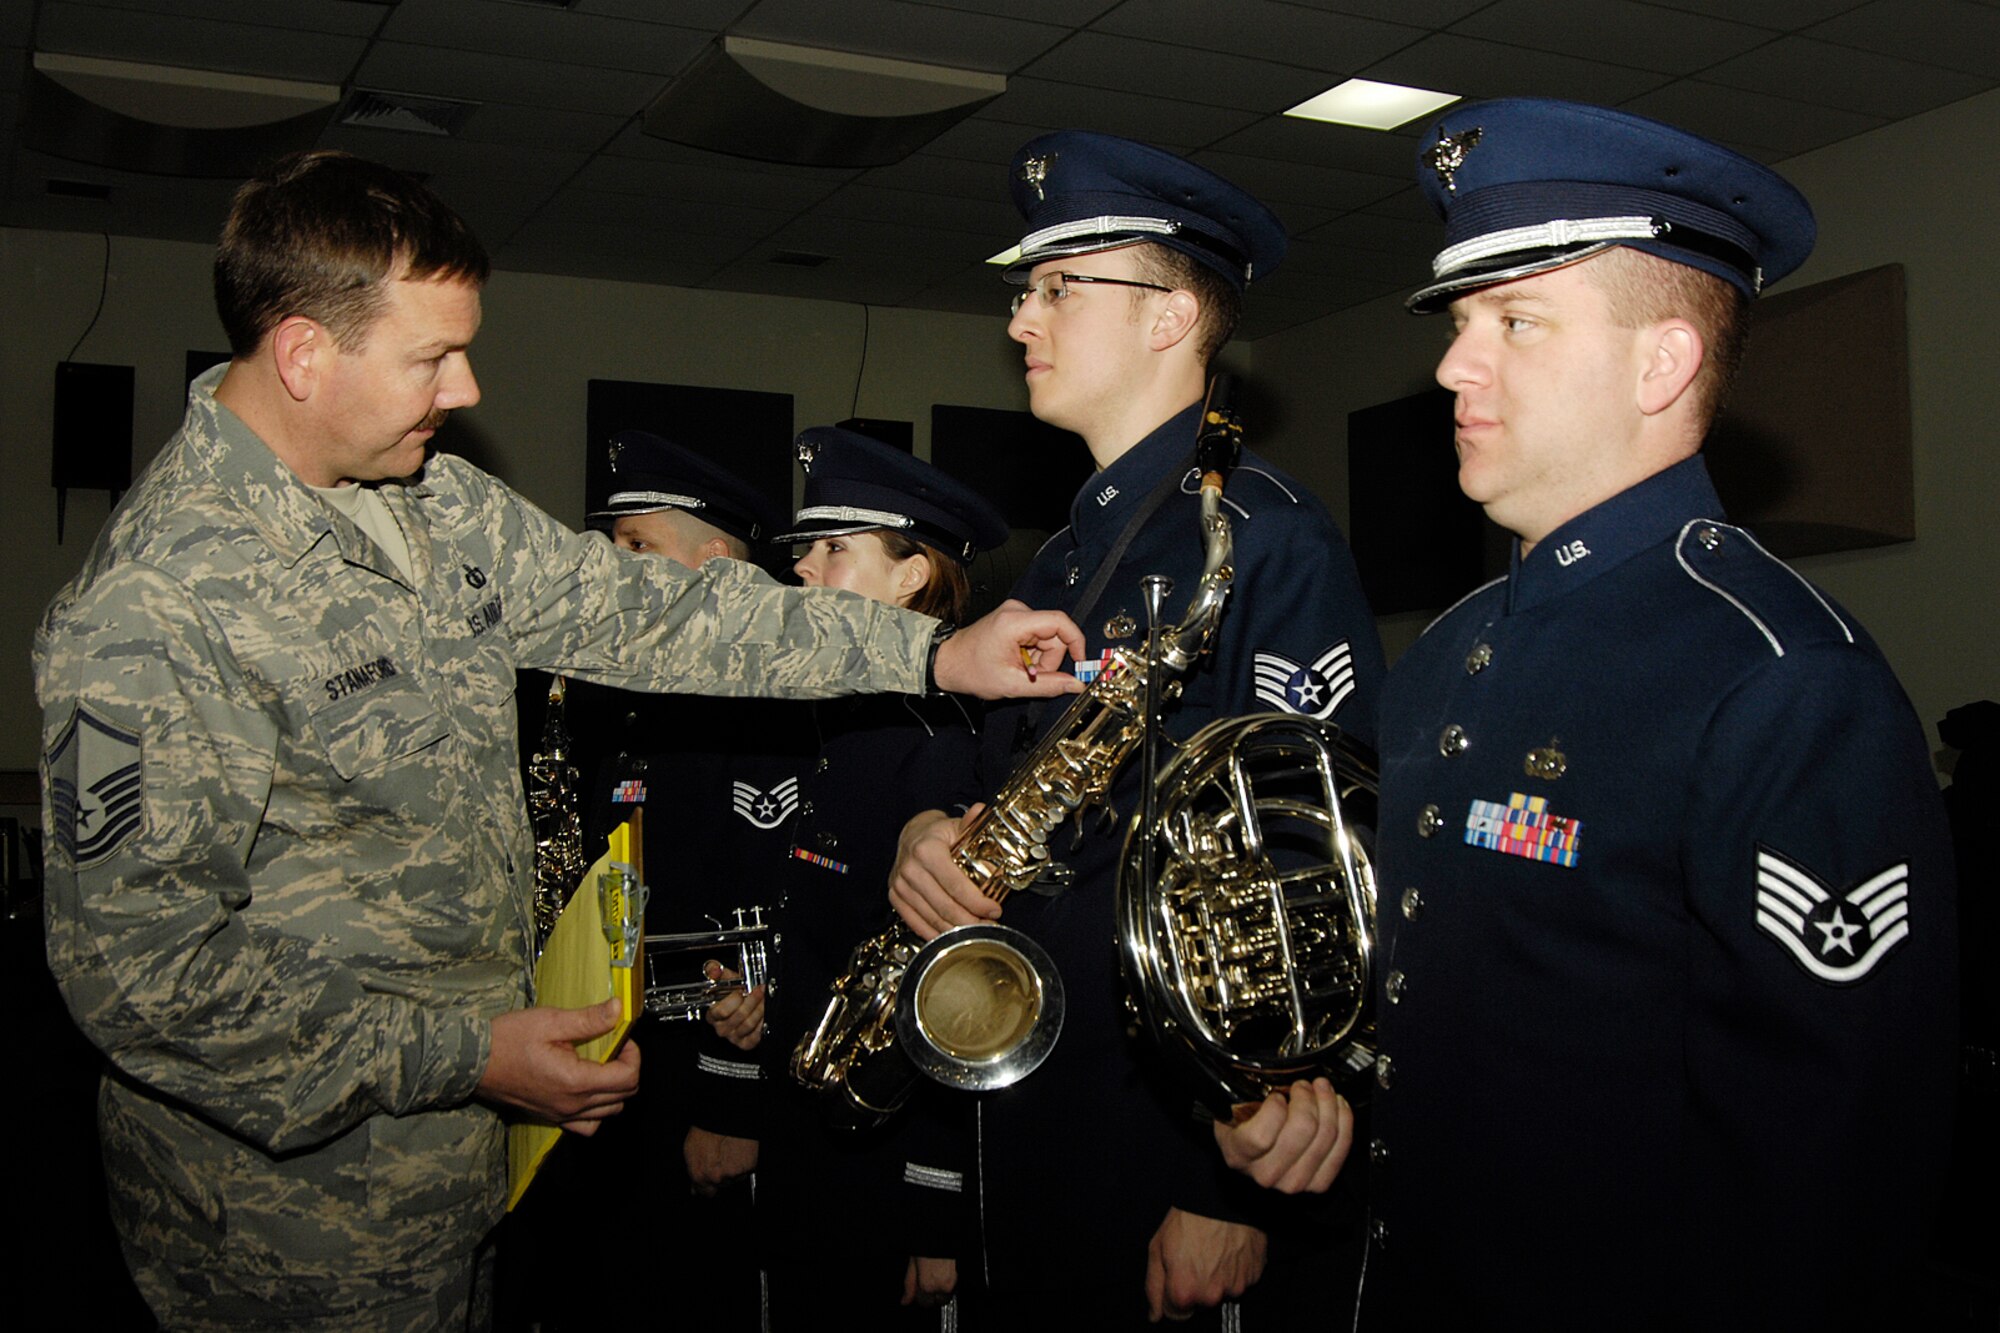 HANSCOM AIR FORCE BASE, Mass. – Master Sgt. Mark Stanaford (left), U.S. Air Force Band of Liberty, inspects the uniform of saxophonist Staff Sgt. Anthony Balester, while French horn player Staff Sgt. Andy Fordham stands at attention. Members of the Ceremonial Band were inspected in preparation for their trip to Washington to perform final honors for President George W. Bush at Andrews AFB on Jan. 20, when he makes his final departure on Air Force One following Inauguration ceremonies. (U.S. Air Force photo by Linda LaBonte Britt)